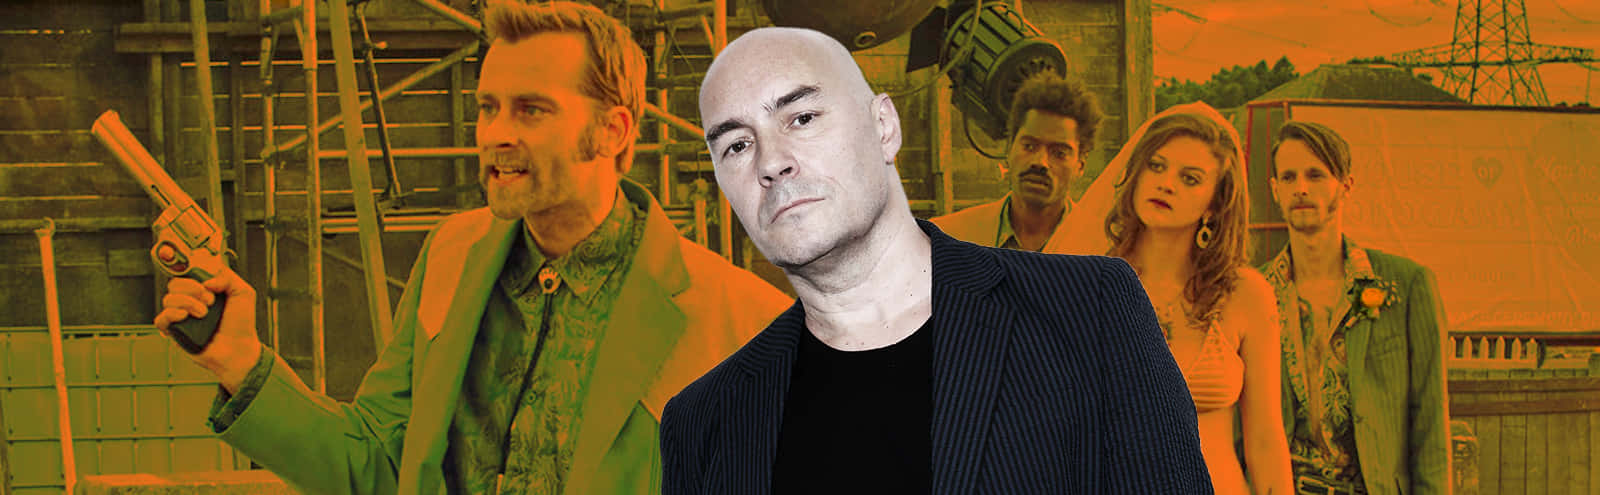 Grant Morrison Posing with Comic Book Background Wallpaper